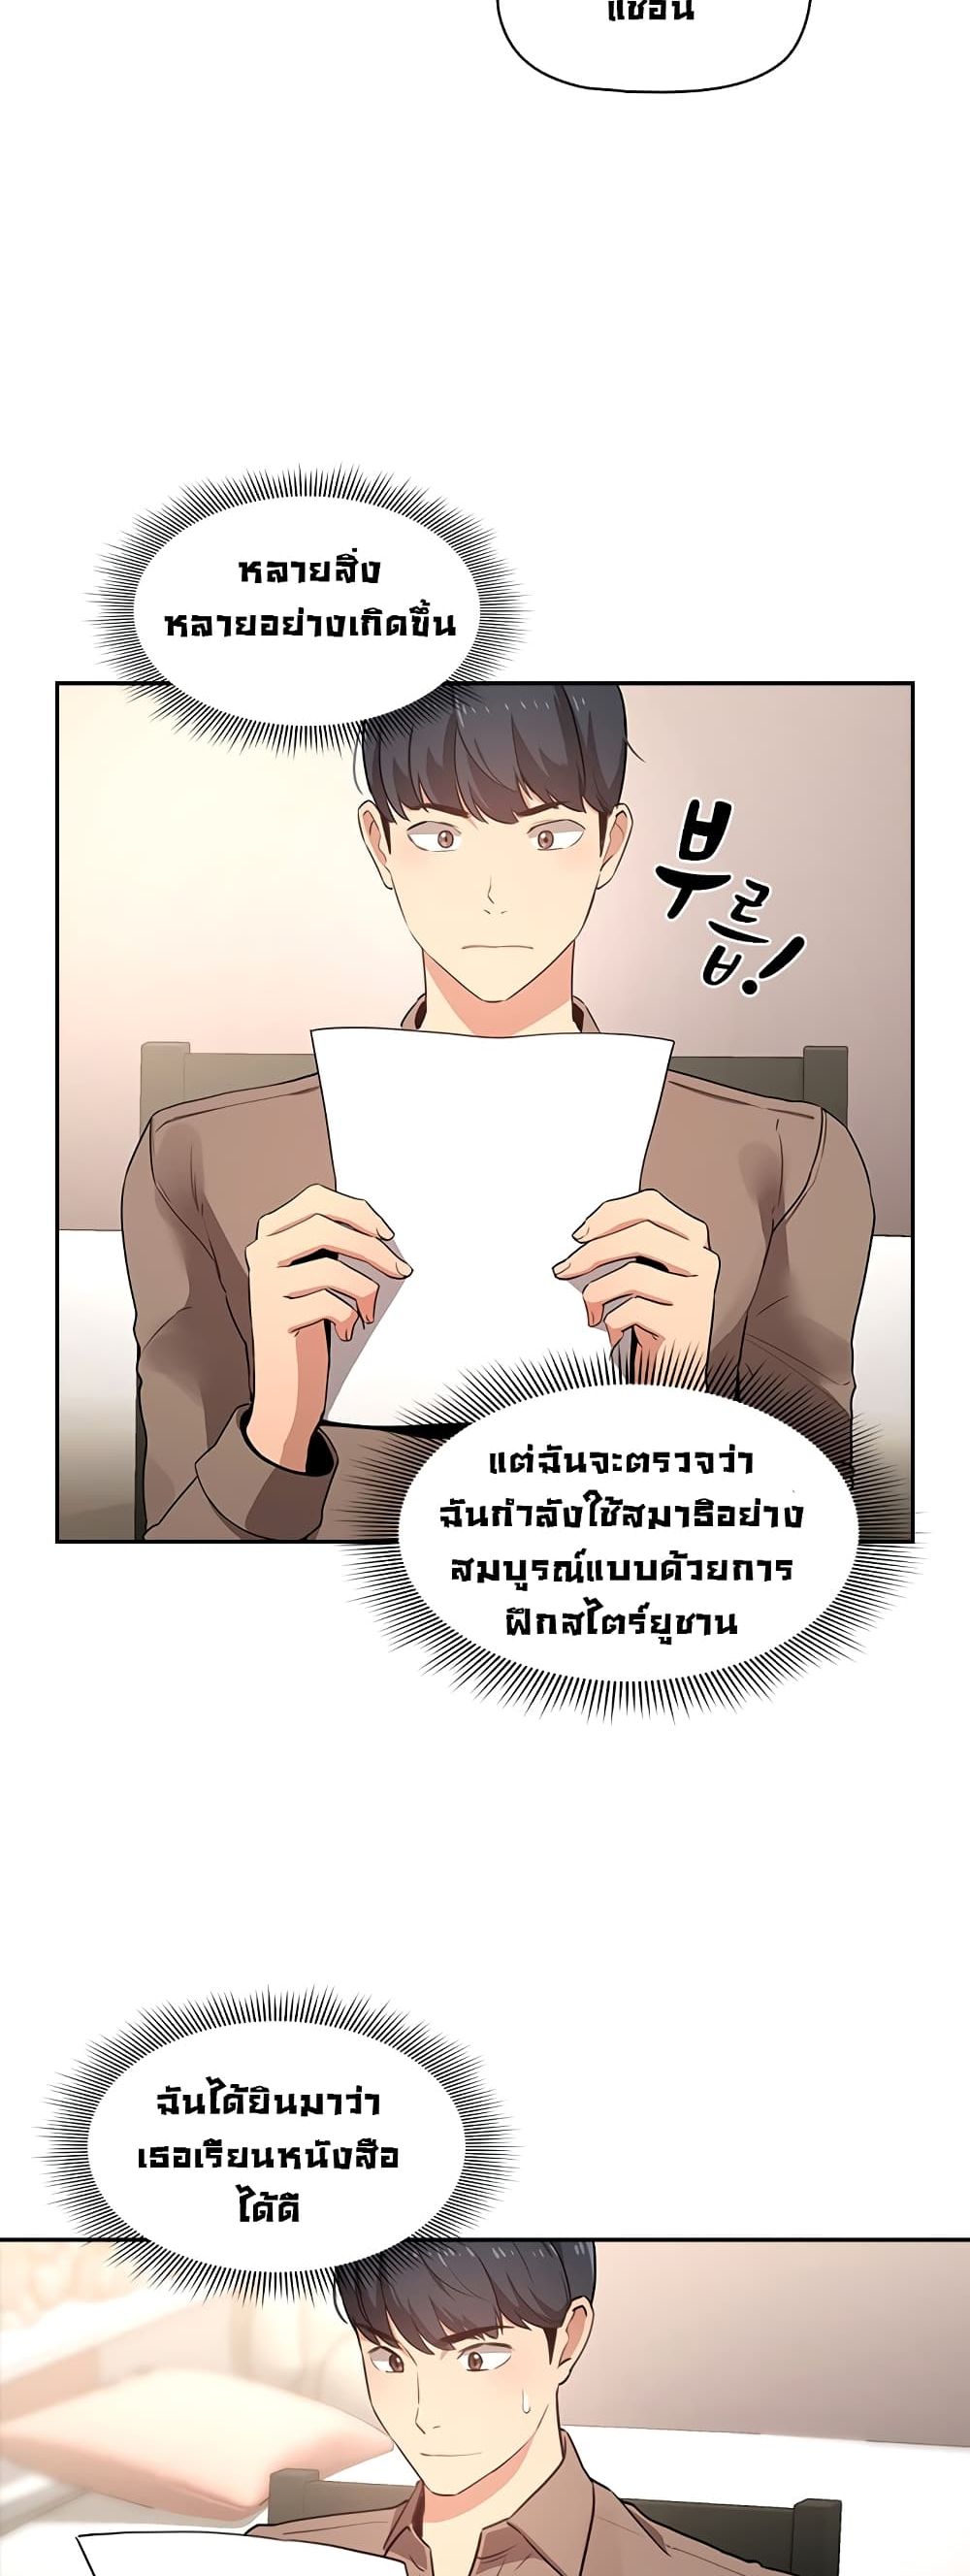 Private Tutoring in These Trying Times 2 ภาพที่ 22